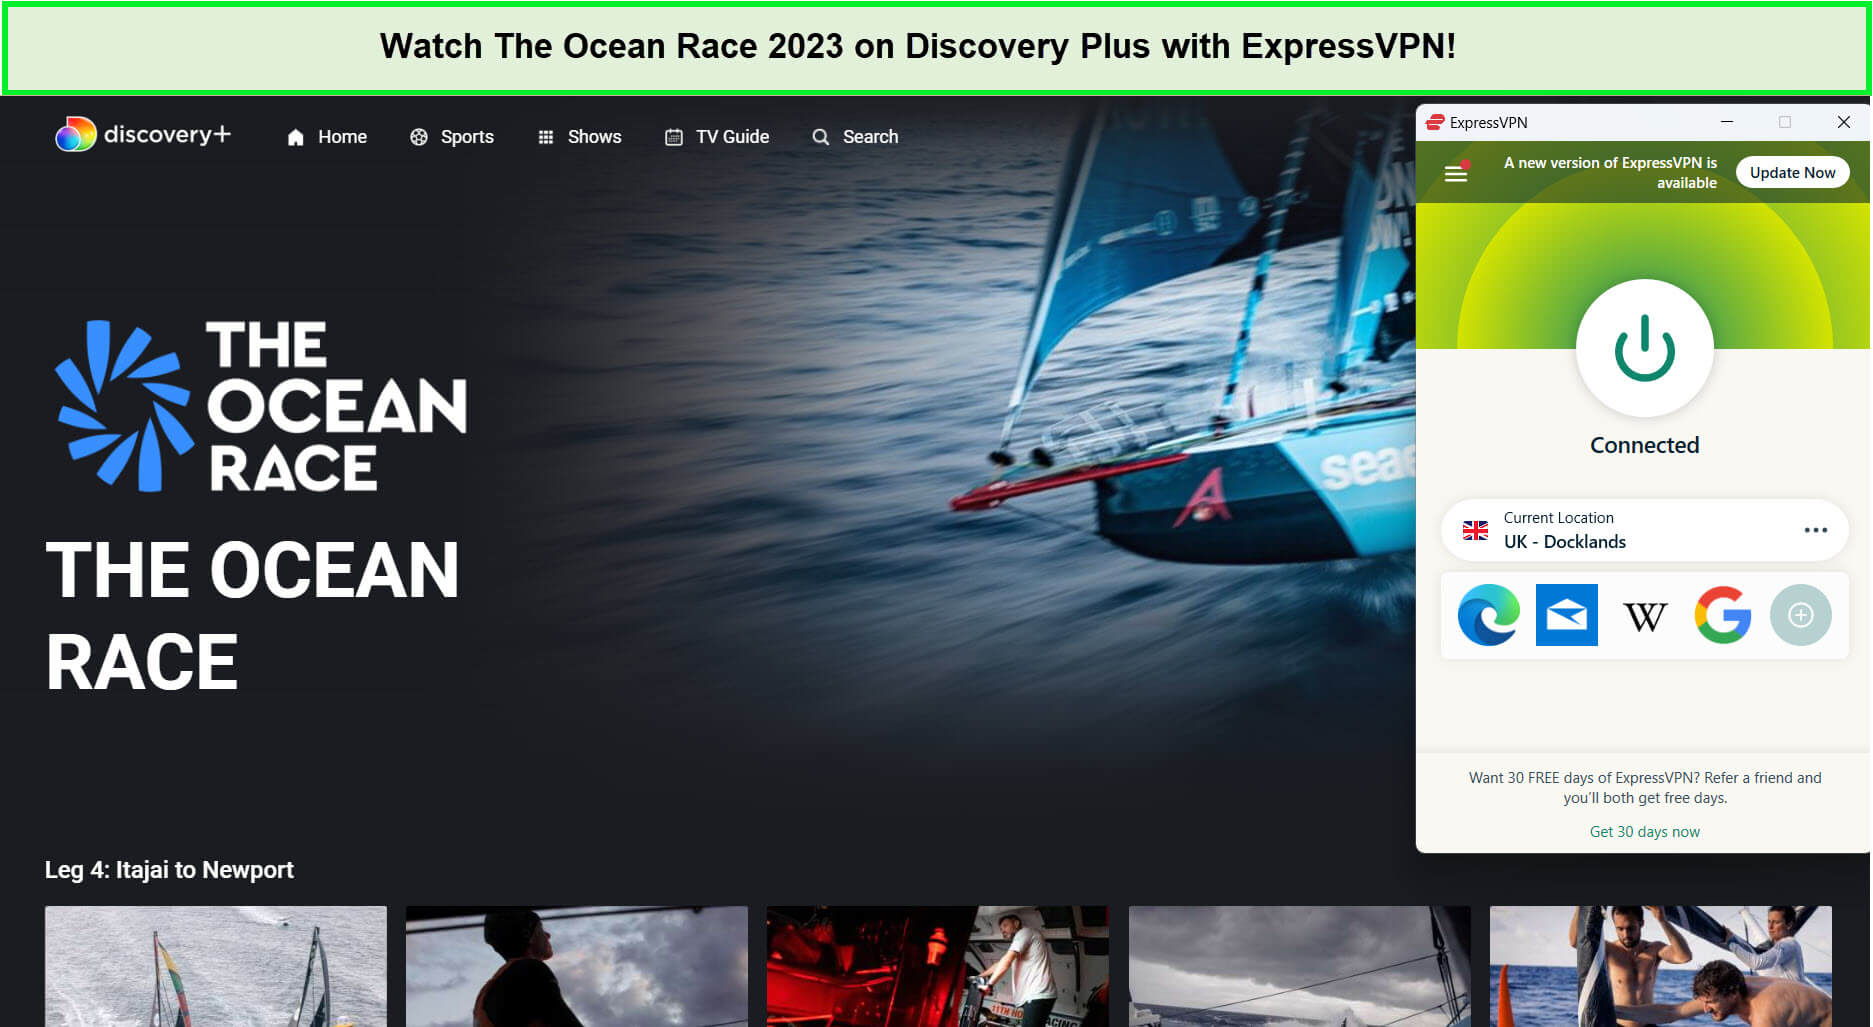 expressvpn-unblocks-the-ocean-race-2023-live-in-USA-on-discovery-plus